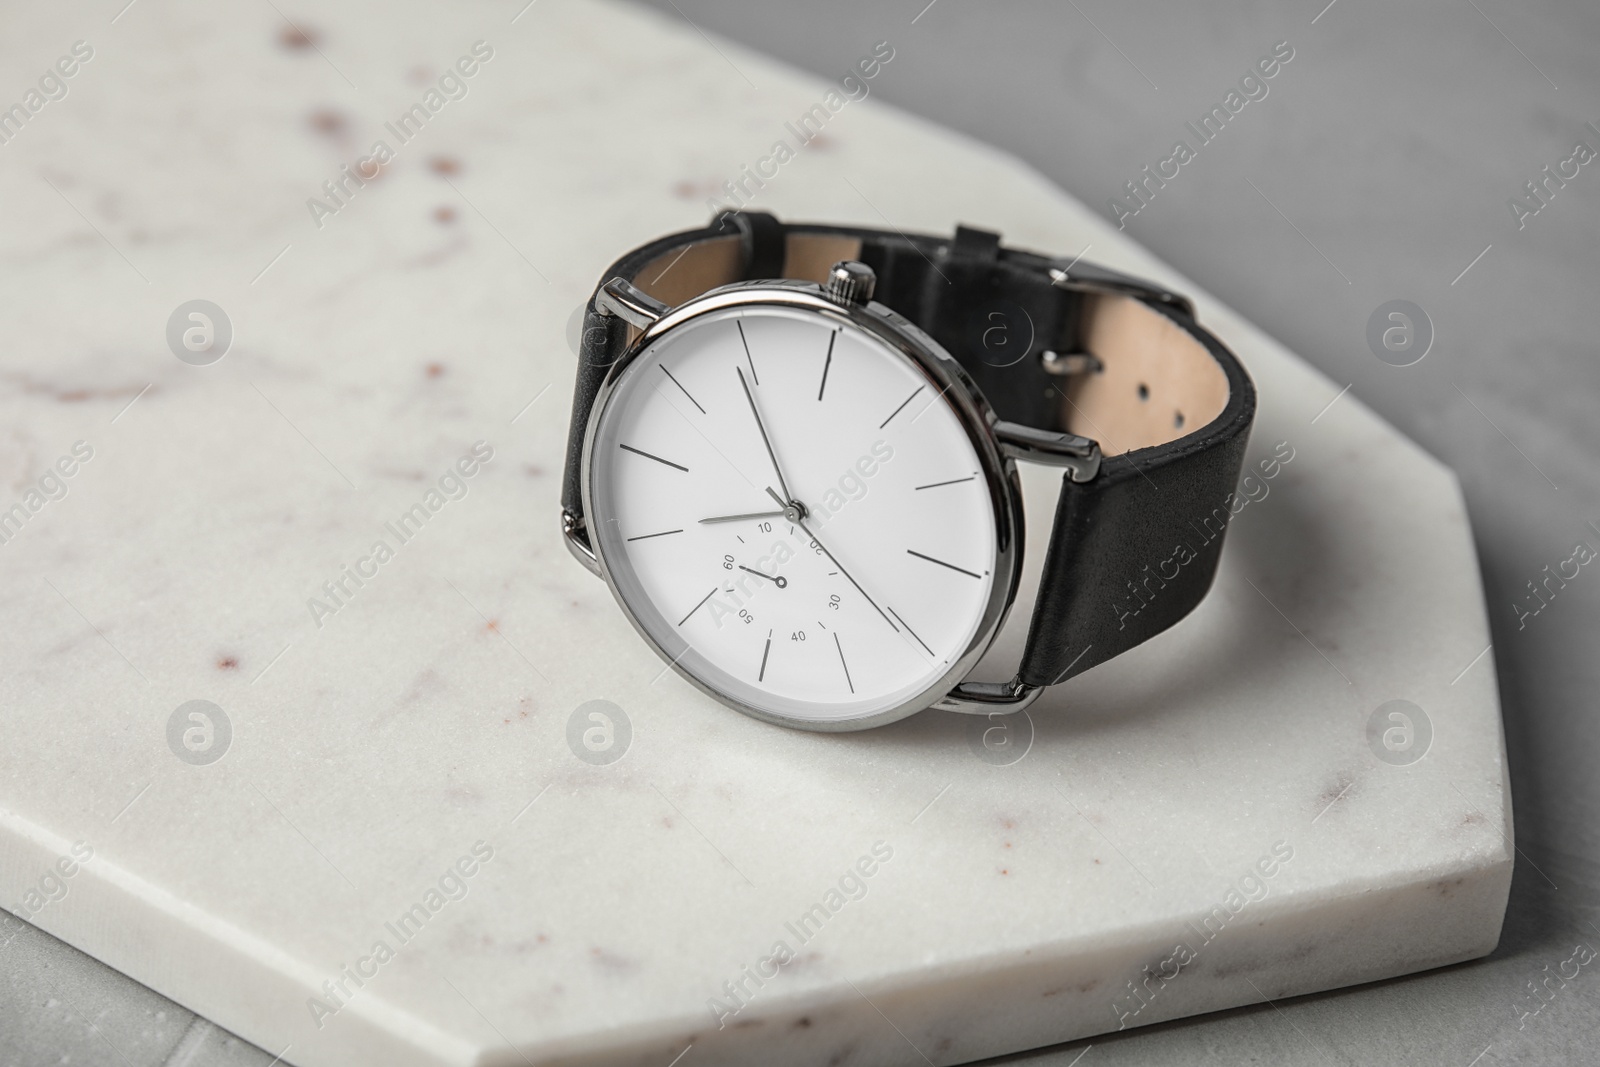 Photo of Board with stylish wrist watch on gray table. Fashion accessory